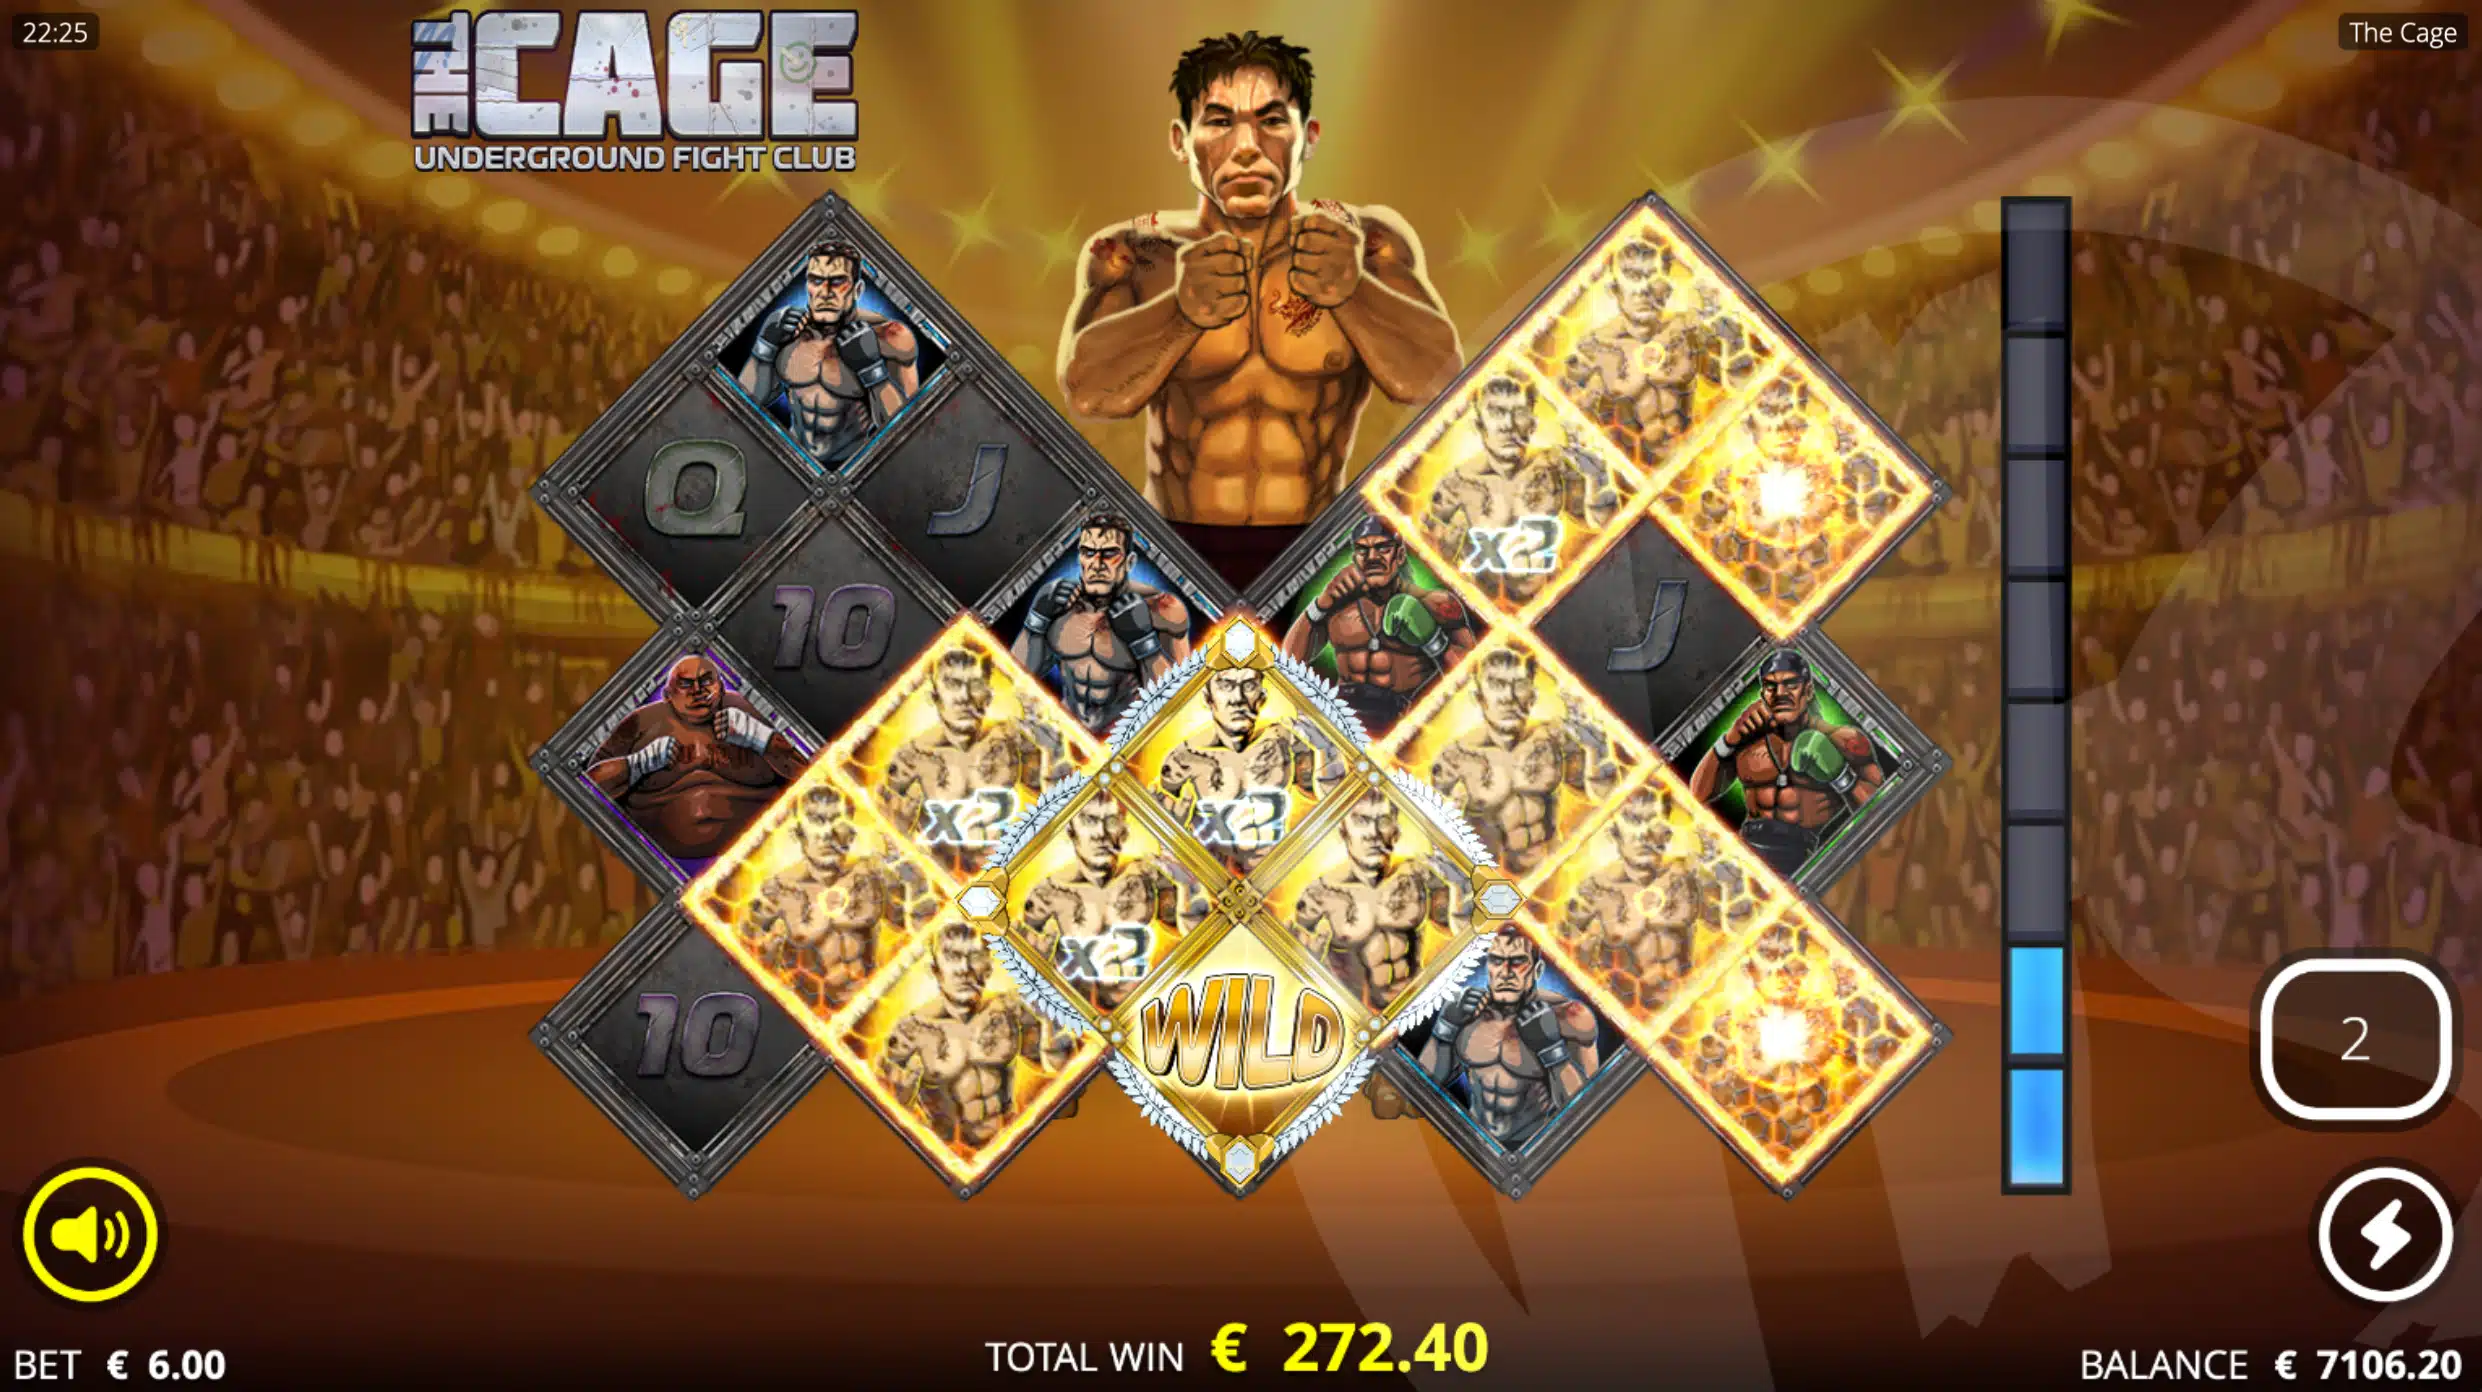 The Cage Title Fight Freespins Fight 5 - Wai "Little Dragon" Le